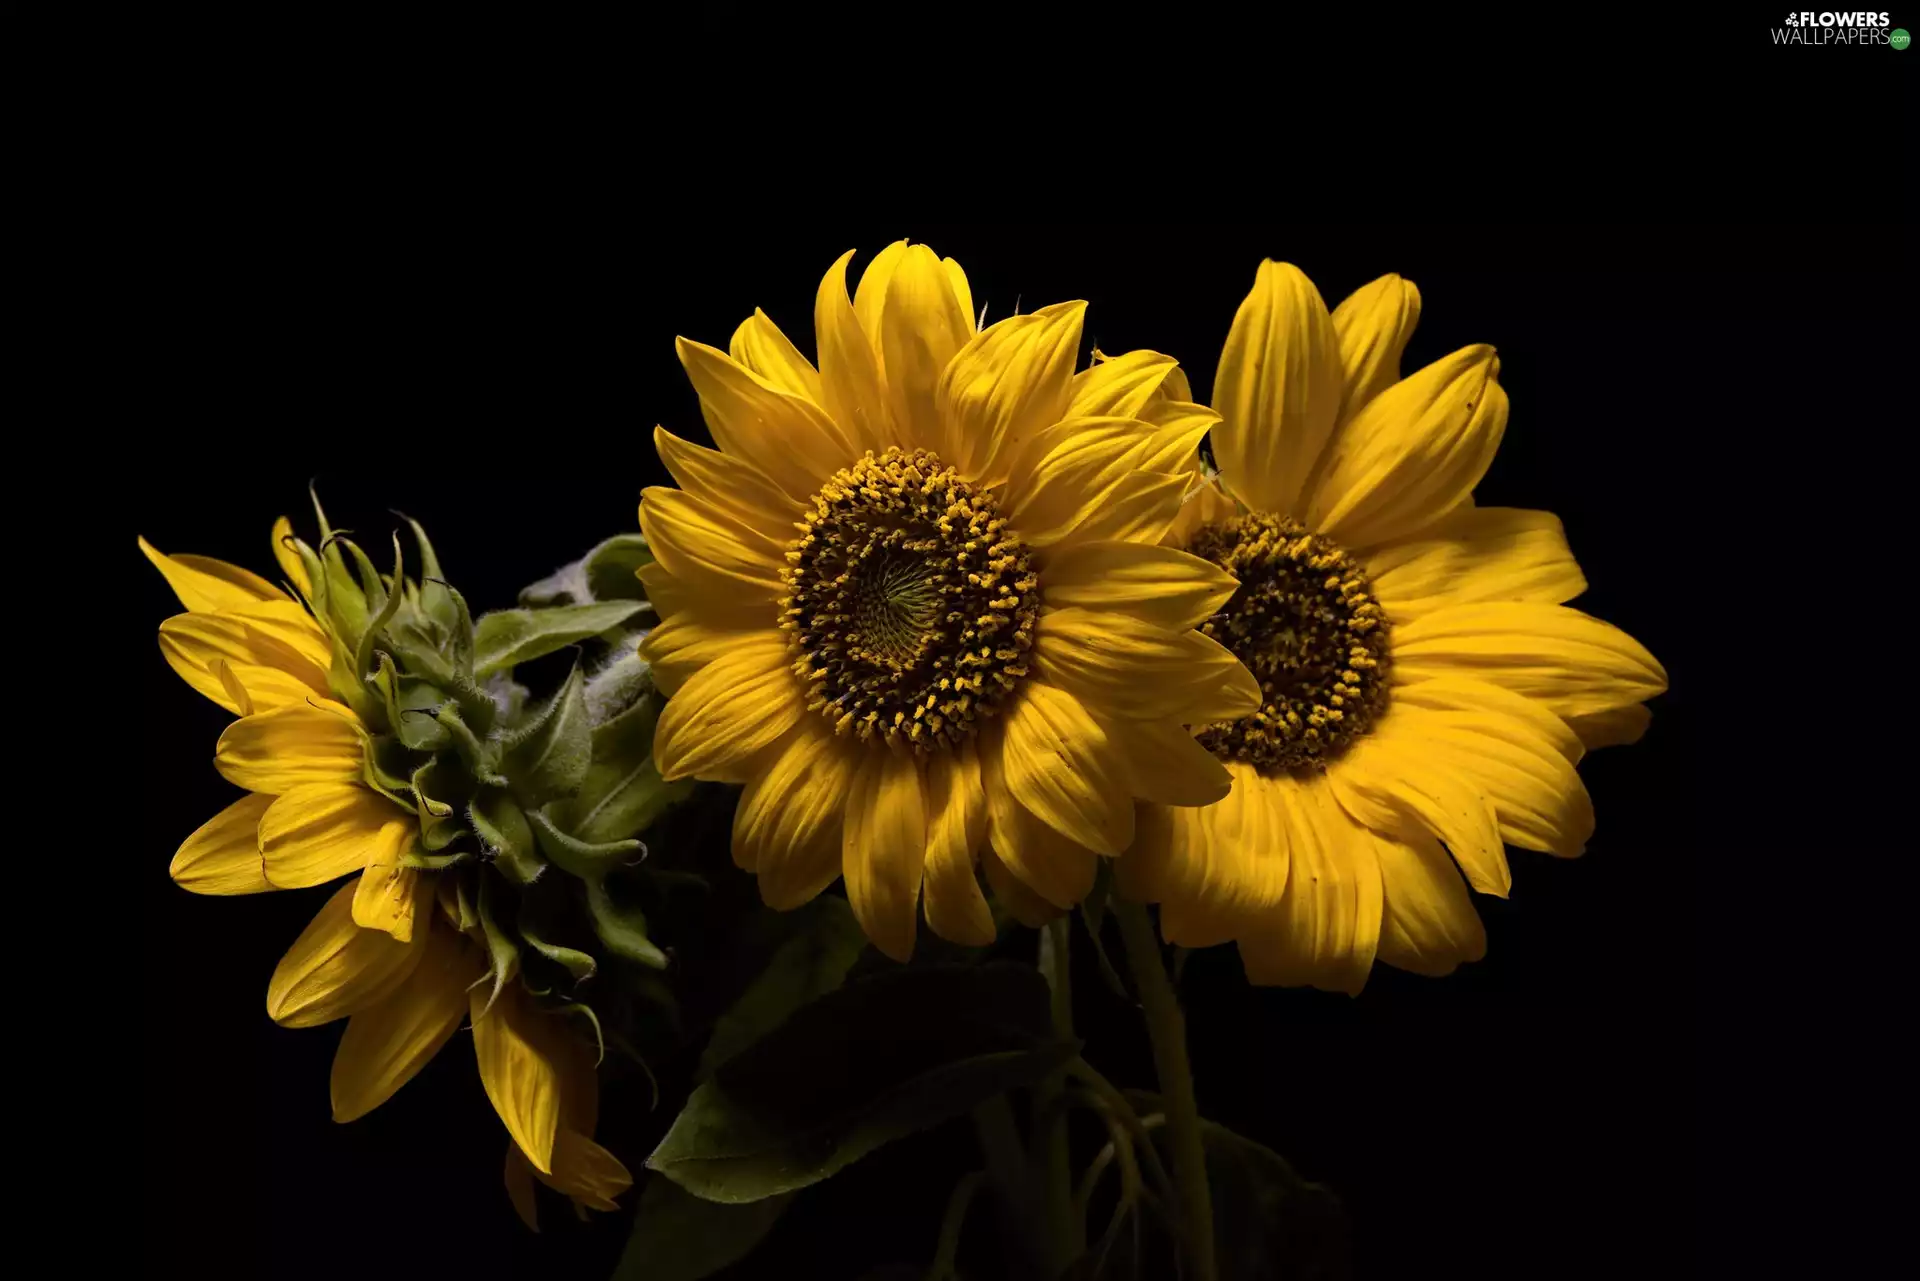 Three, Black, background, decorative Sunflowers - Flowers wallpapers: 2048x1366